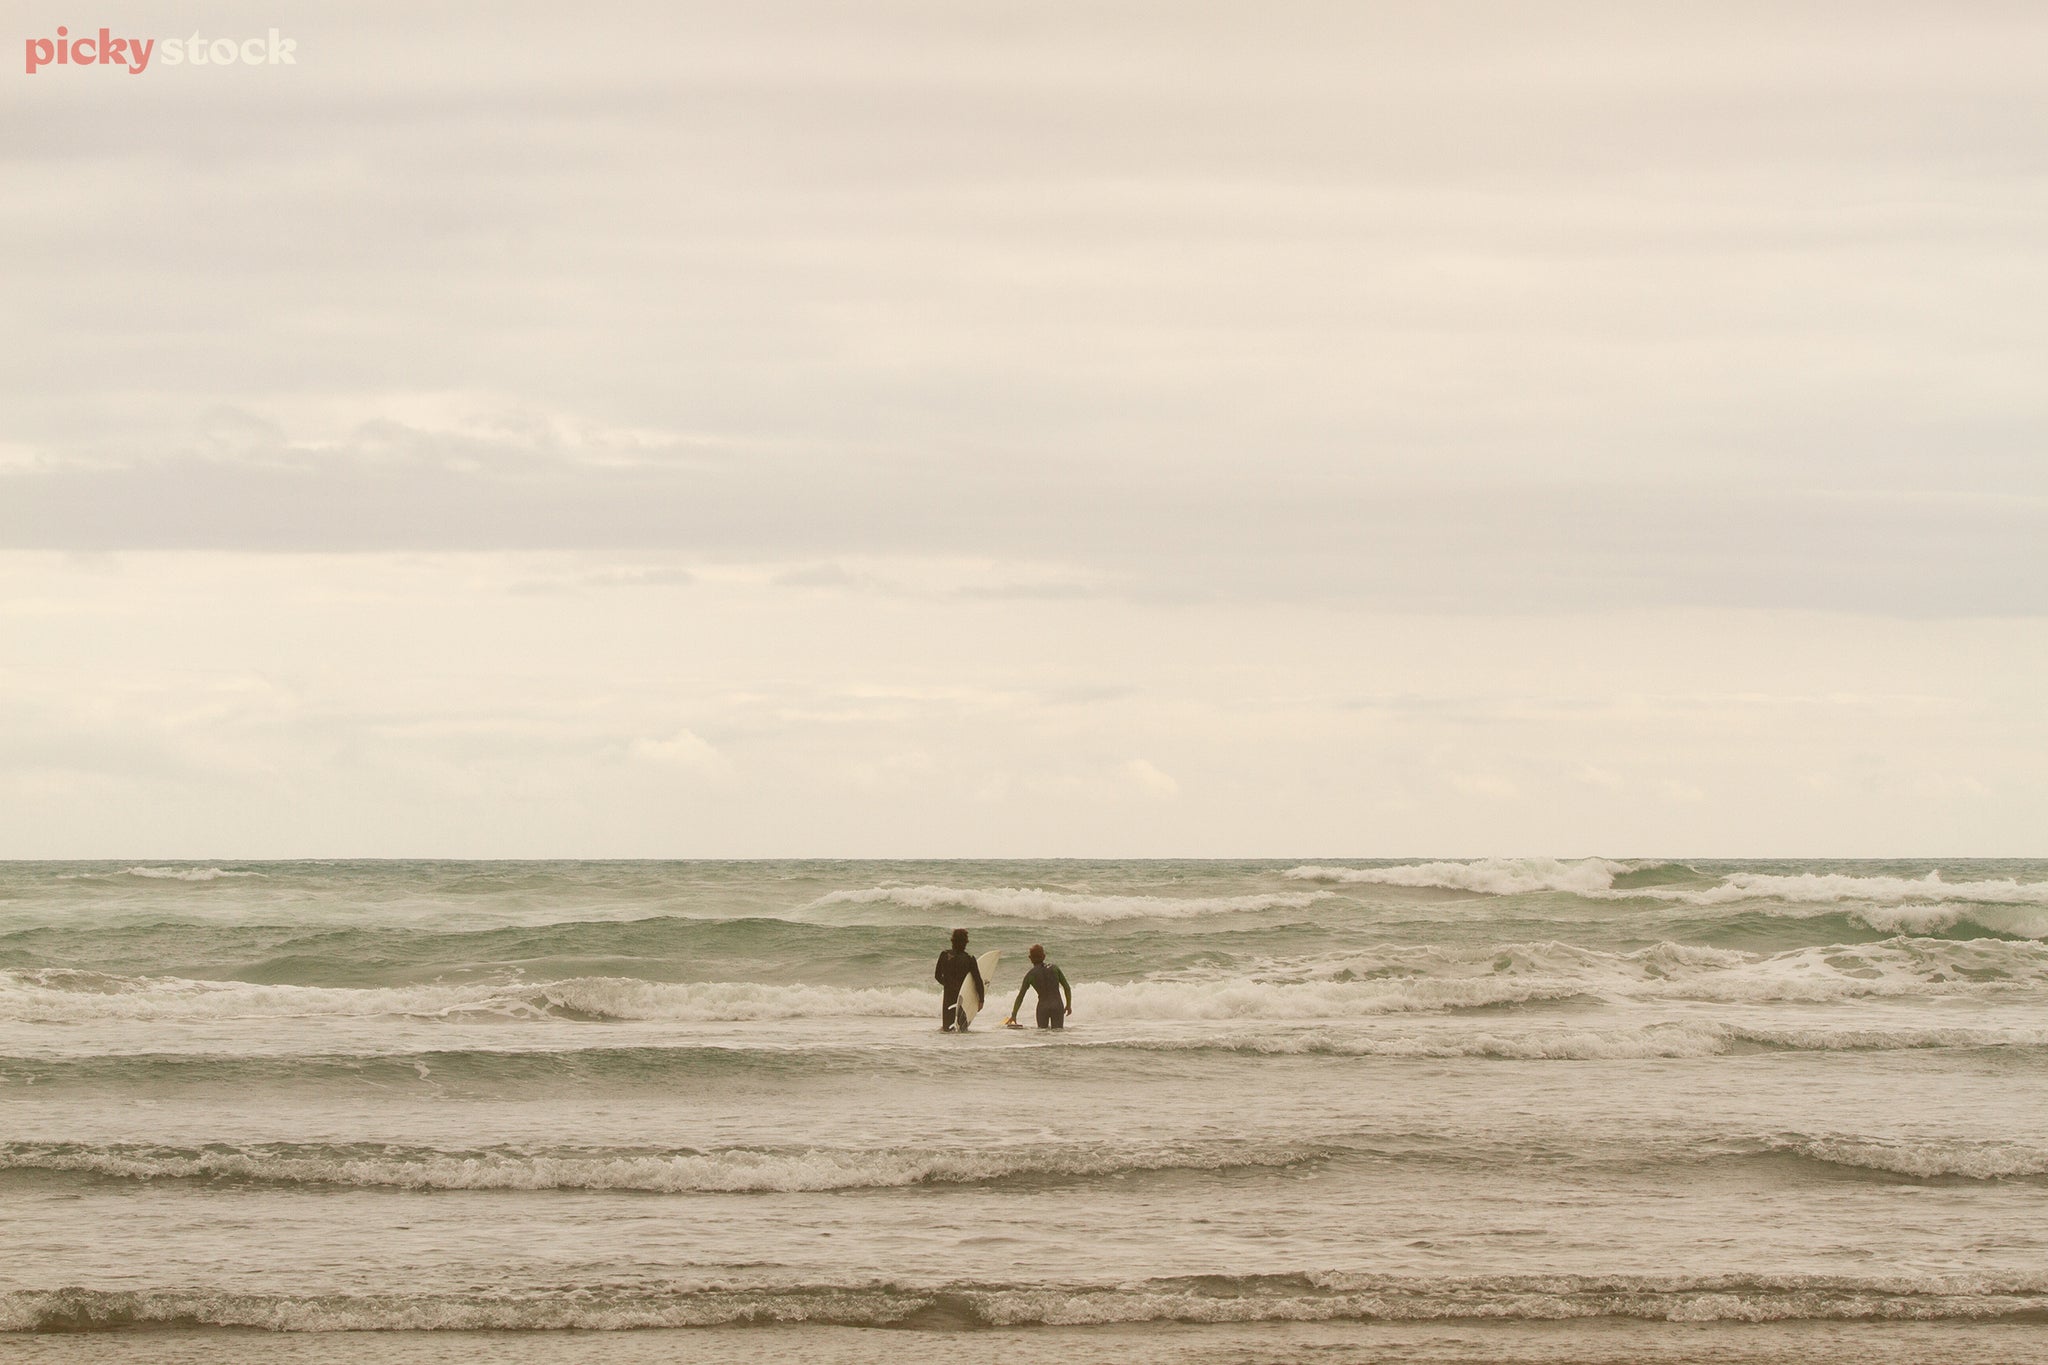 Landscape of two surfers in black wetsuits wading out into the ocean, the waves breaking against them under a clear bluish green sky.